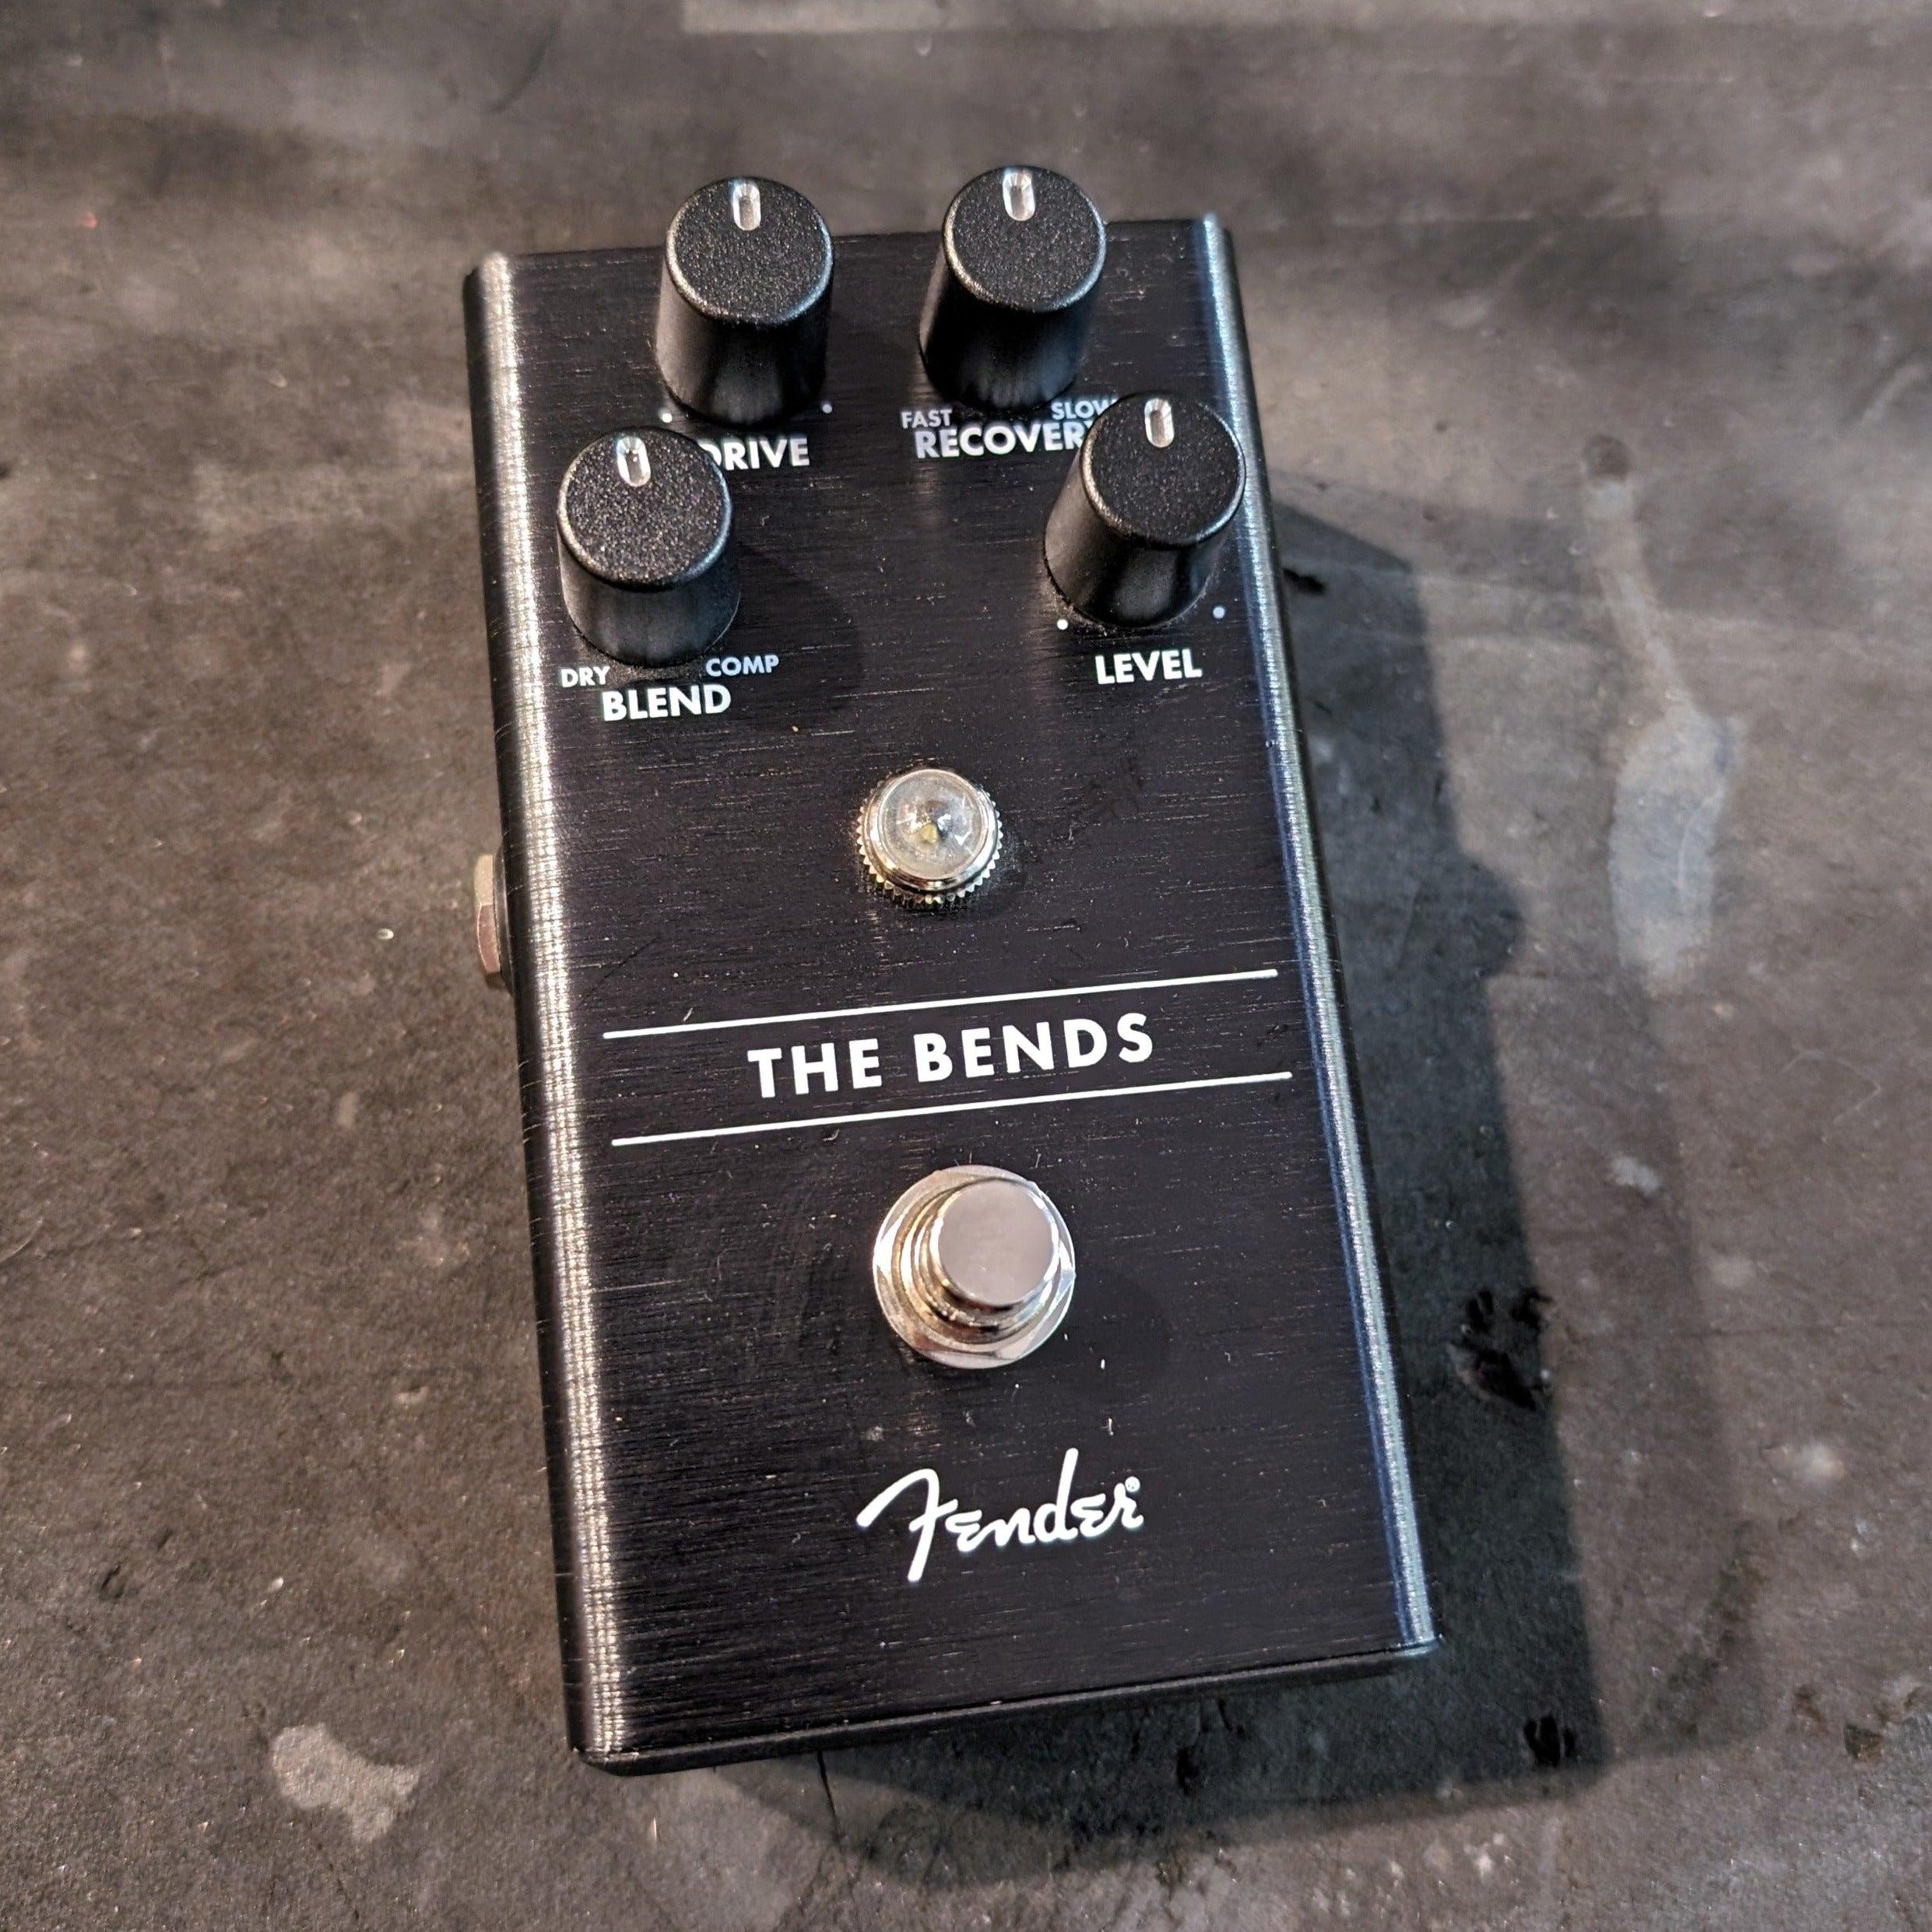 Secondhand The Bends Compressor - Muso's Stuff